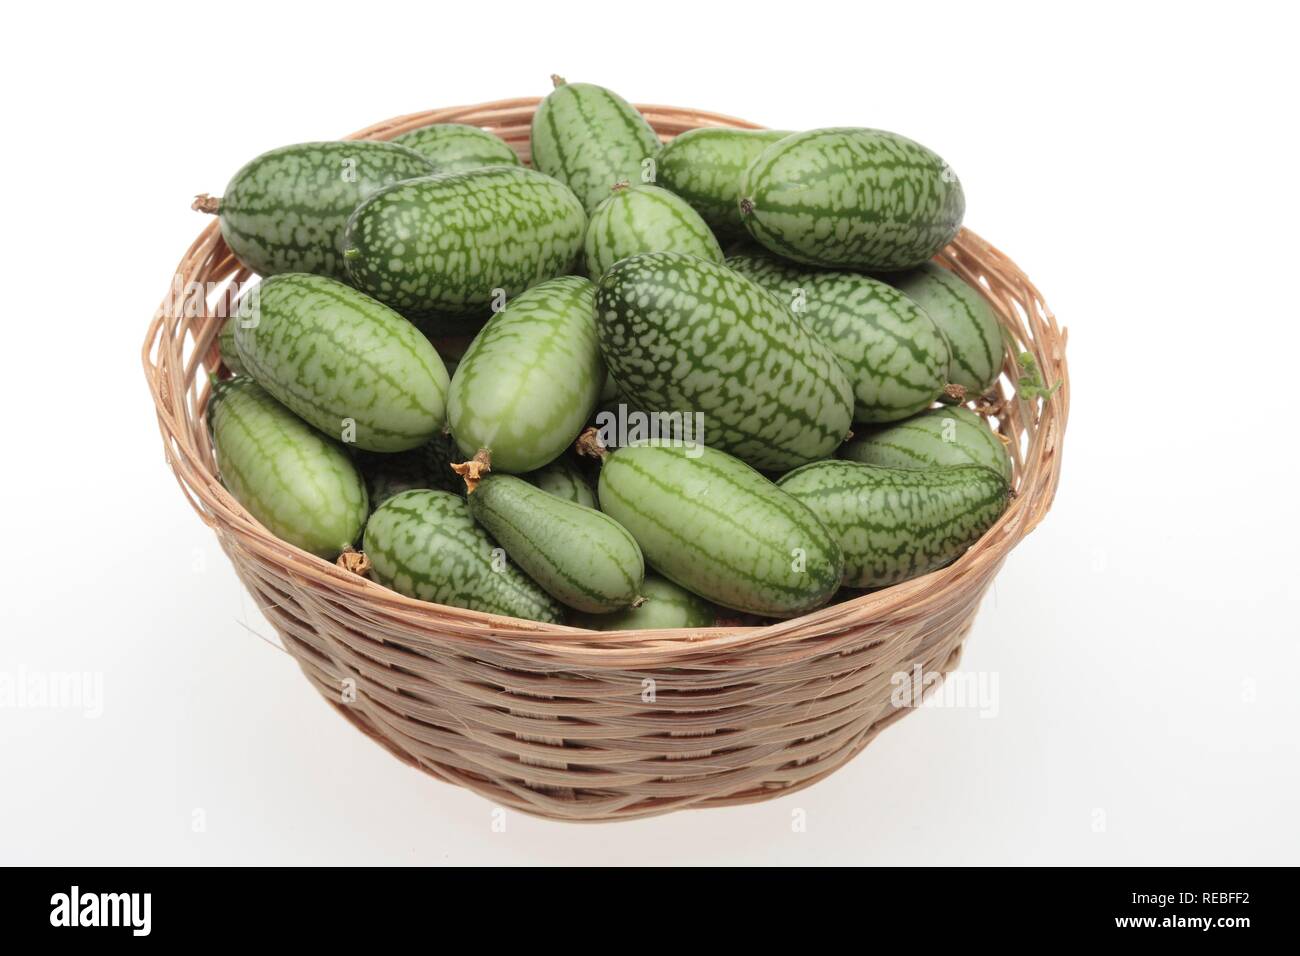 Mexican Sour Gherkin, Mexican Miniature Watermelon or Mouse Melon (Meliothria scabra), Vegetable Stock Photo